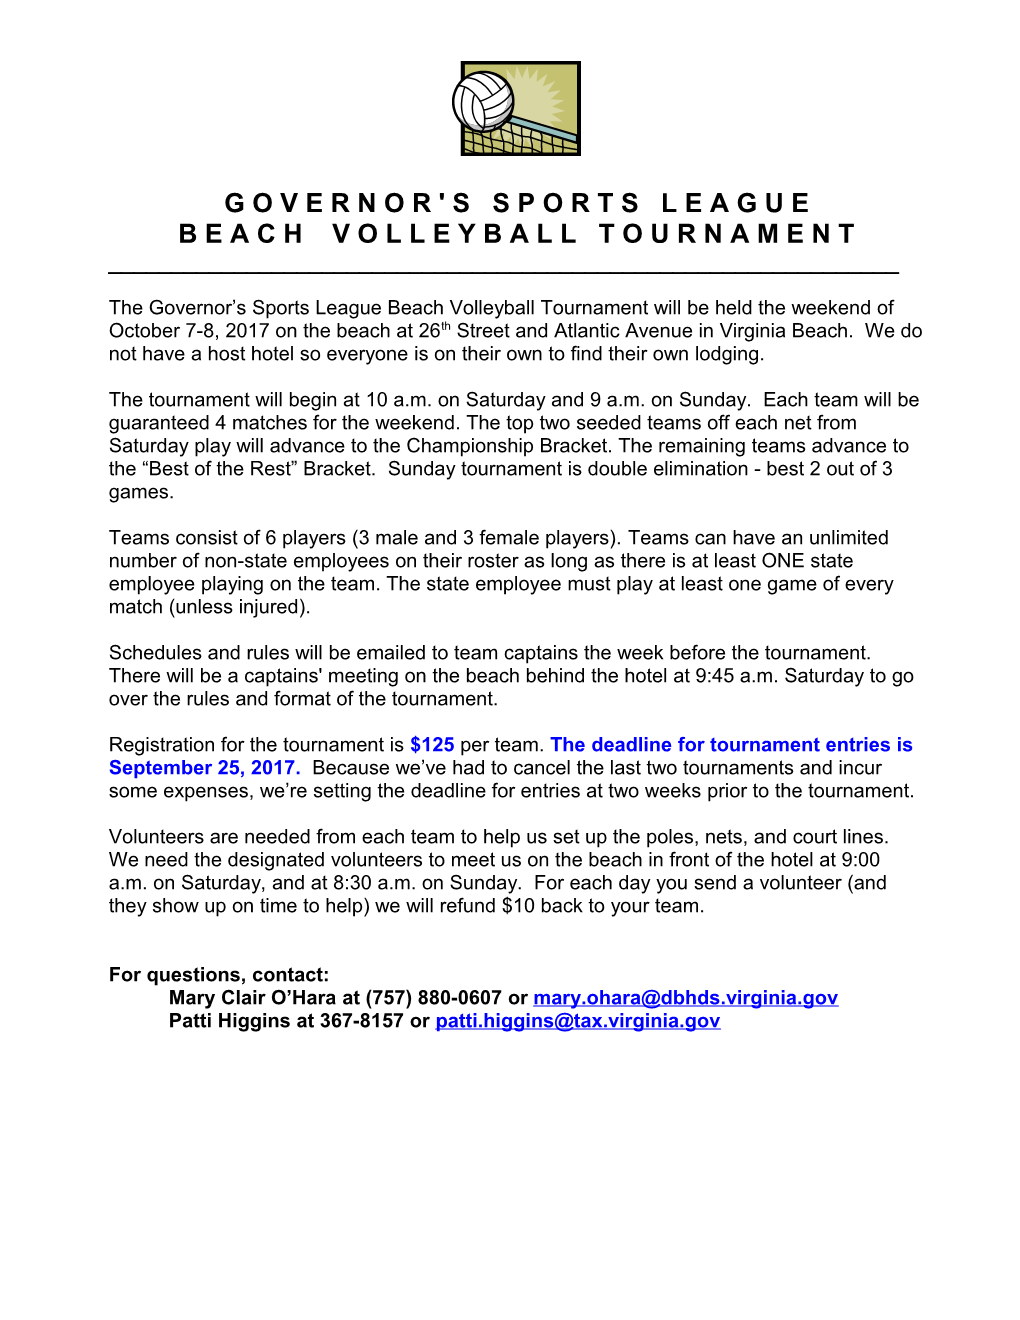 The Governor S Sports League Beach Volleyball Tournament Will Be Held the Weekend of October